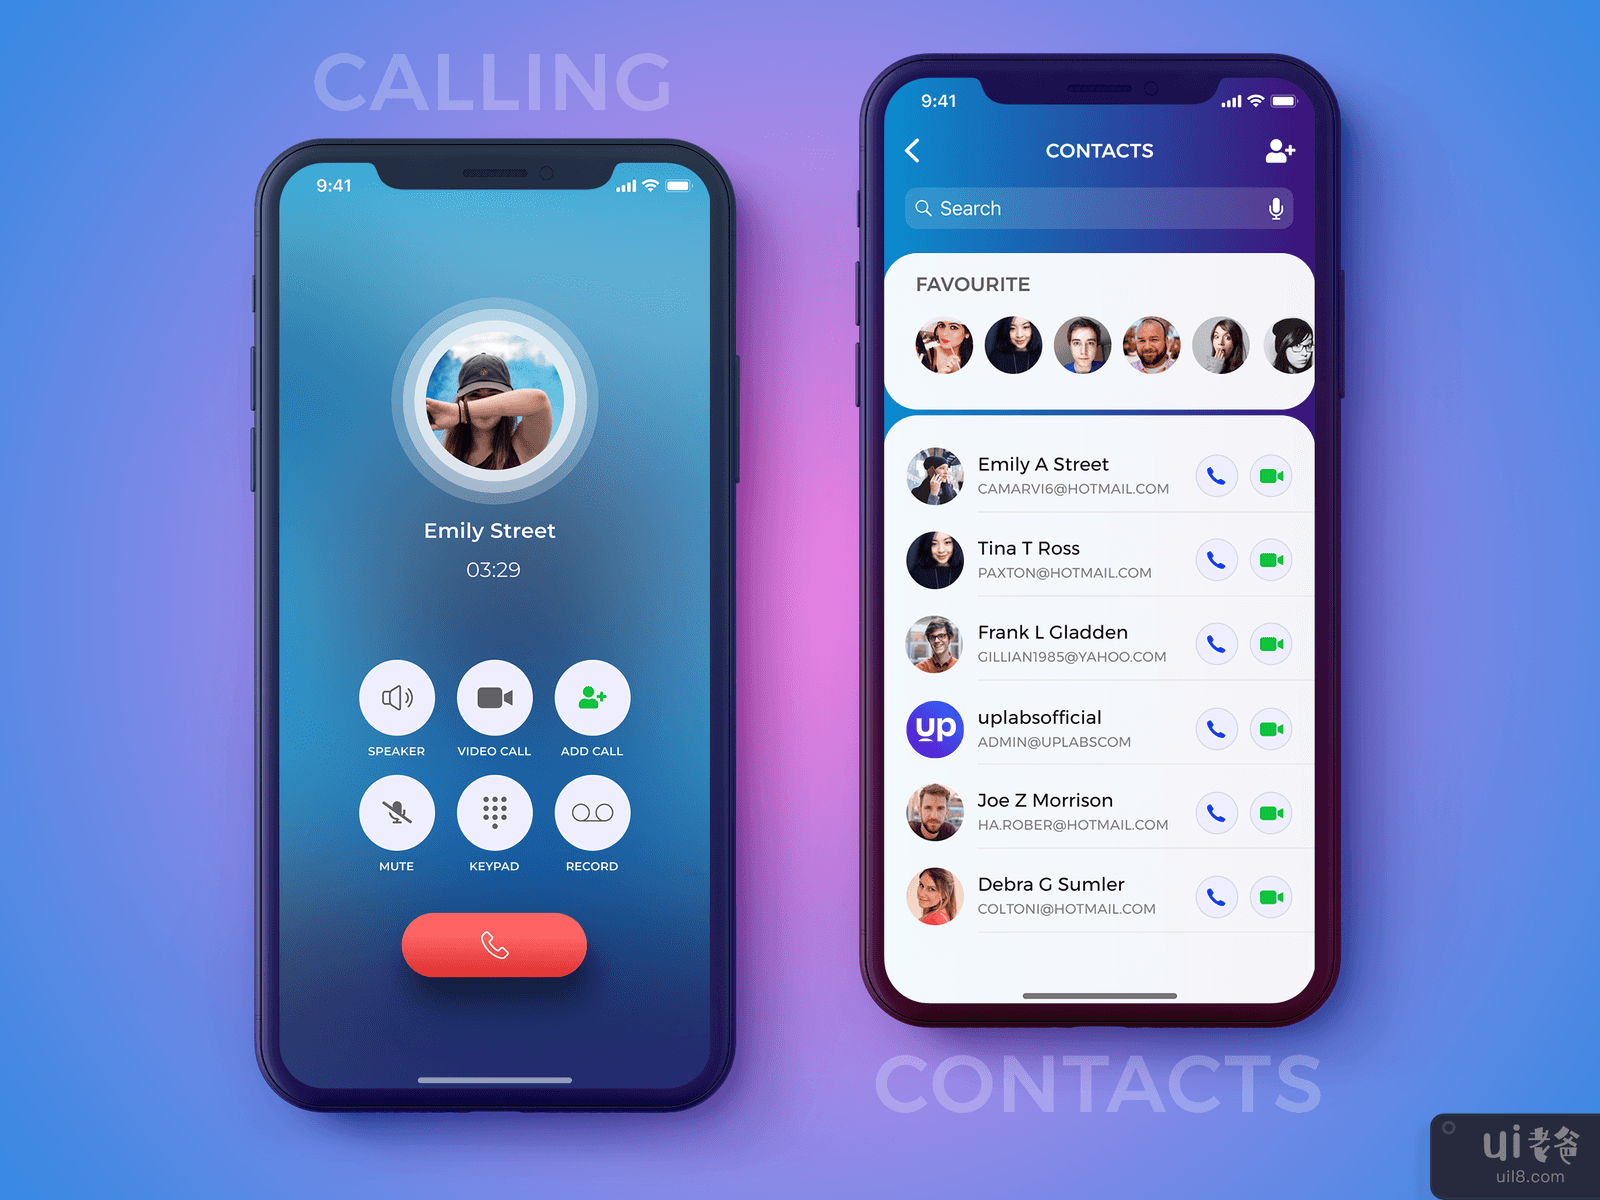 Calling & Contacts Page